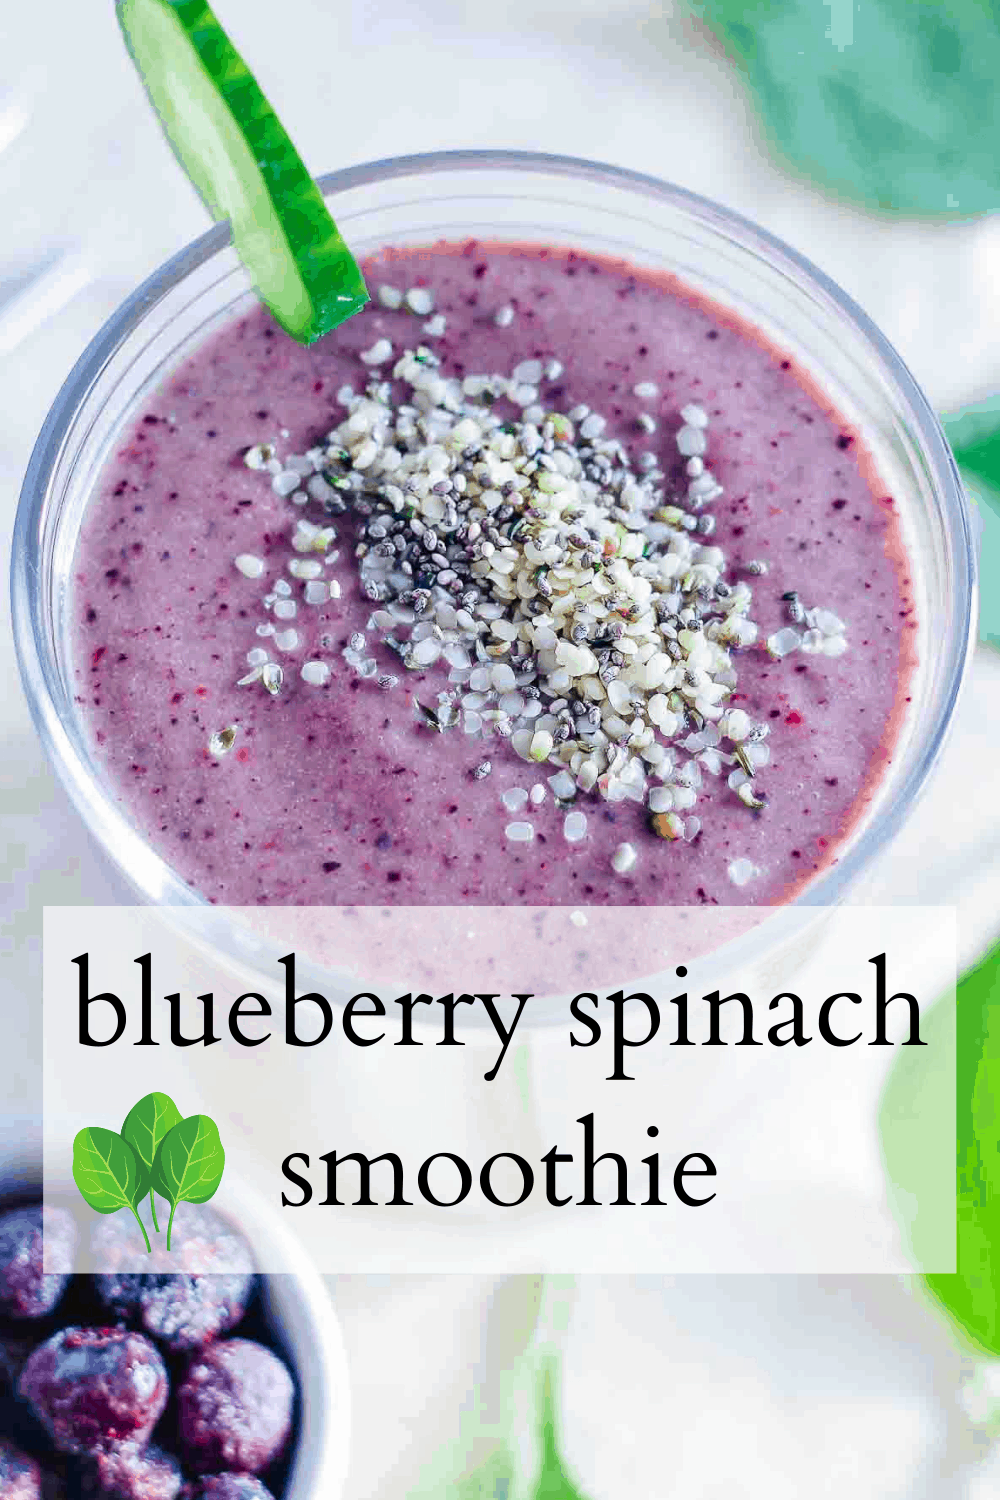 Blueberry Spinach Smoothie - Easy Vegan Recipe - The Honour System